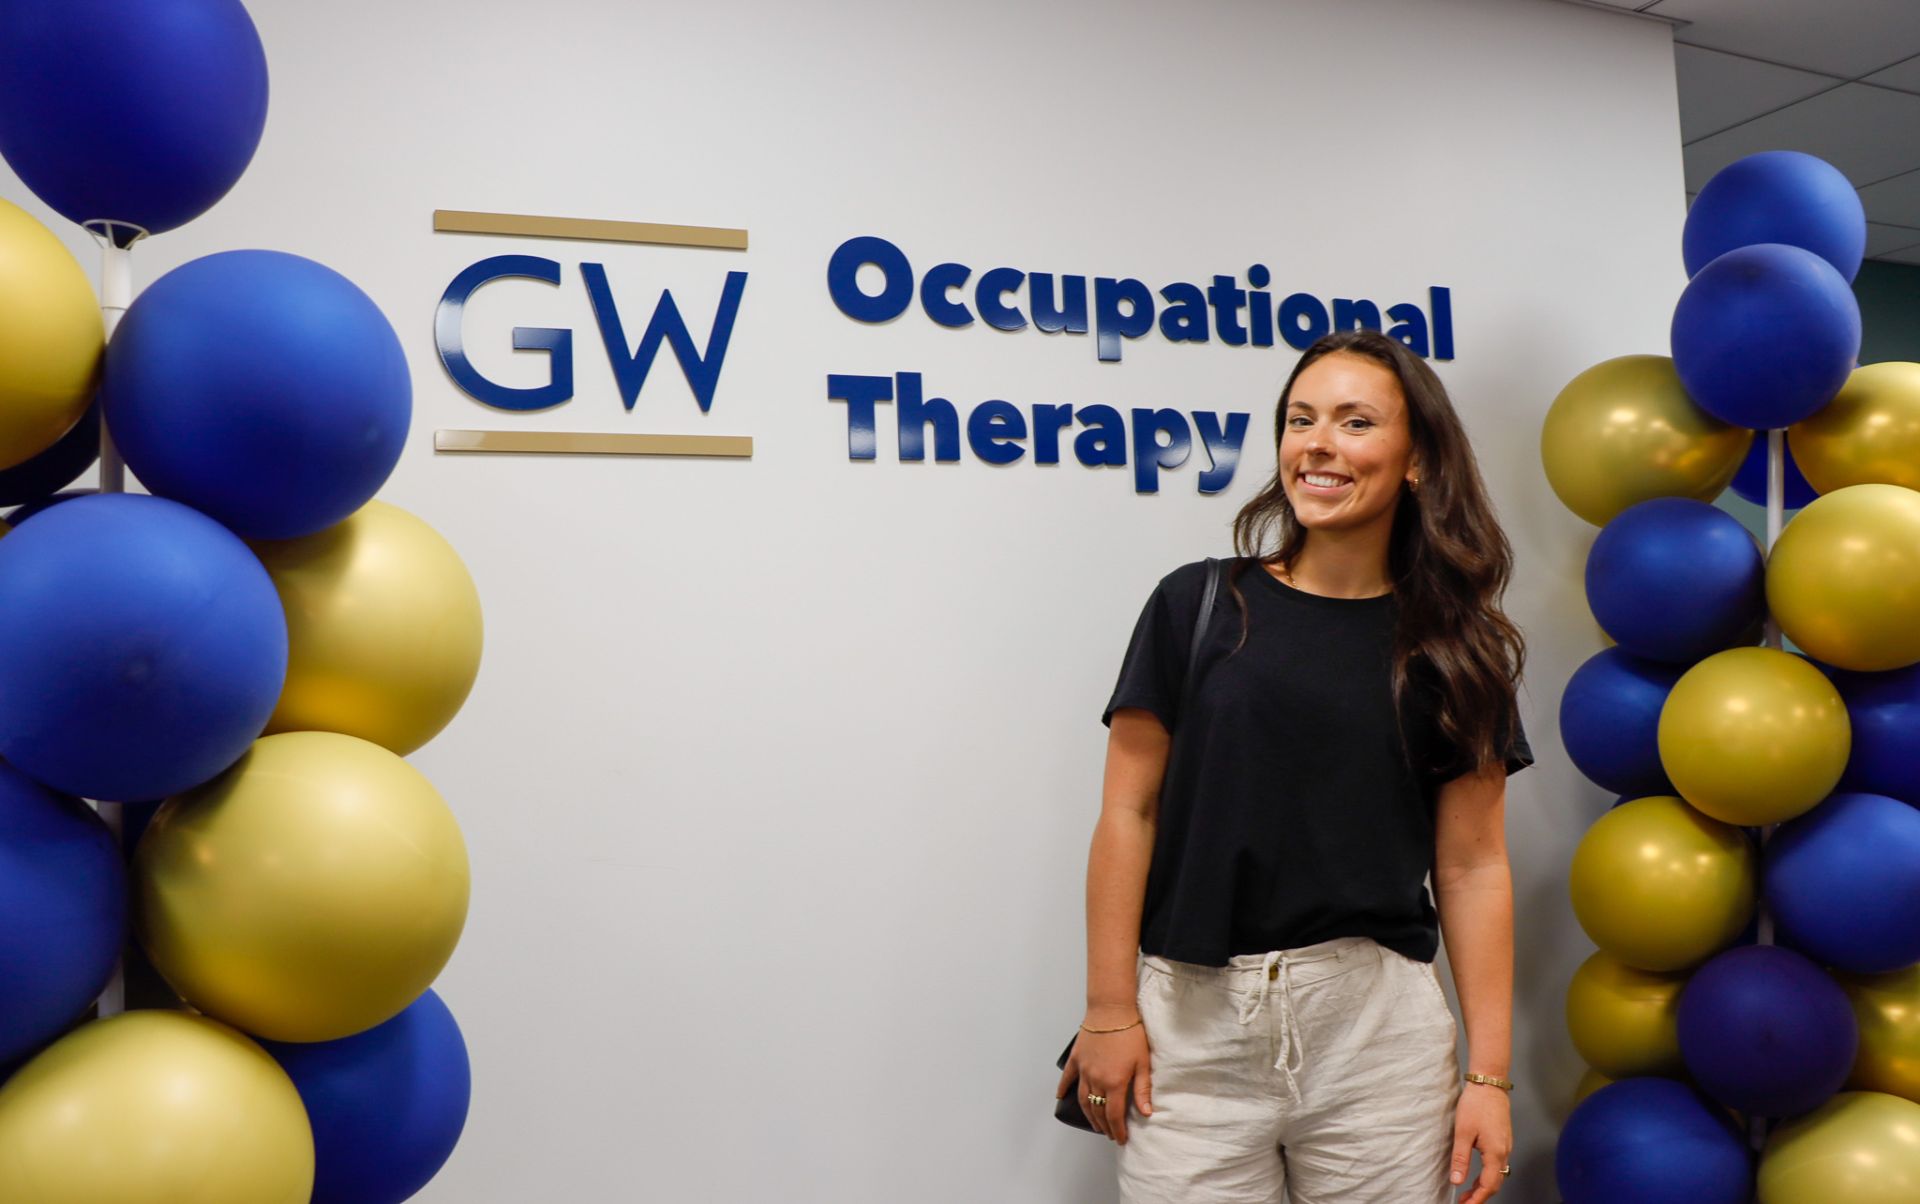 student smiling in front of GW OT sign and balloons